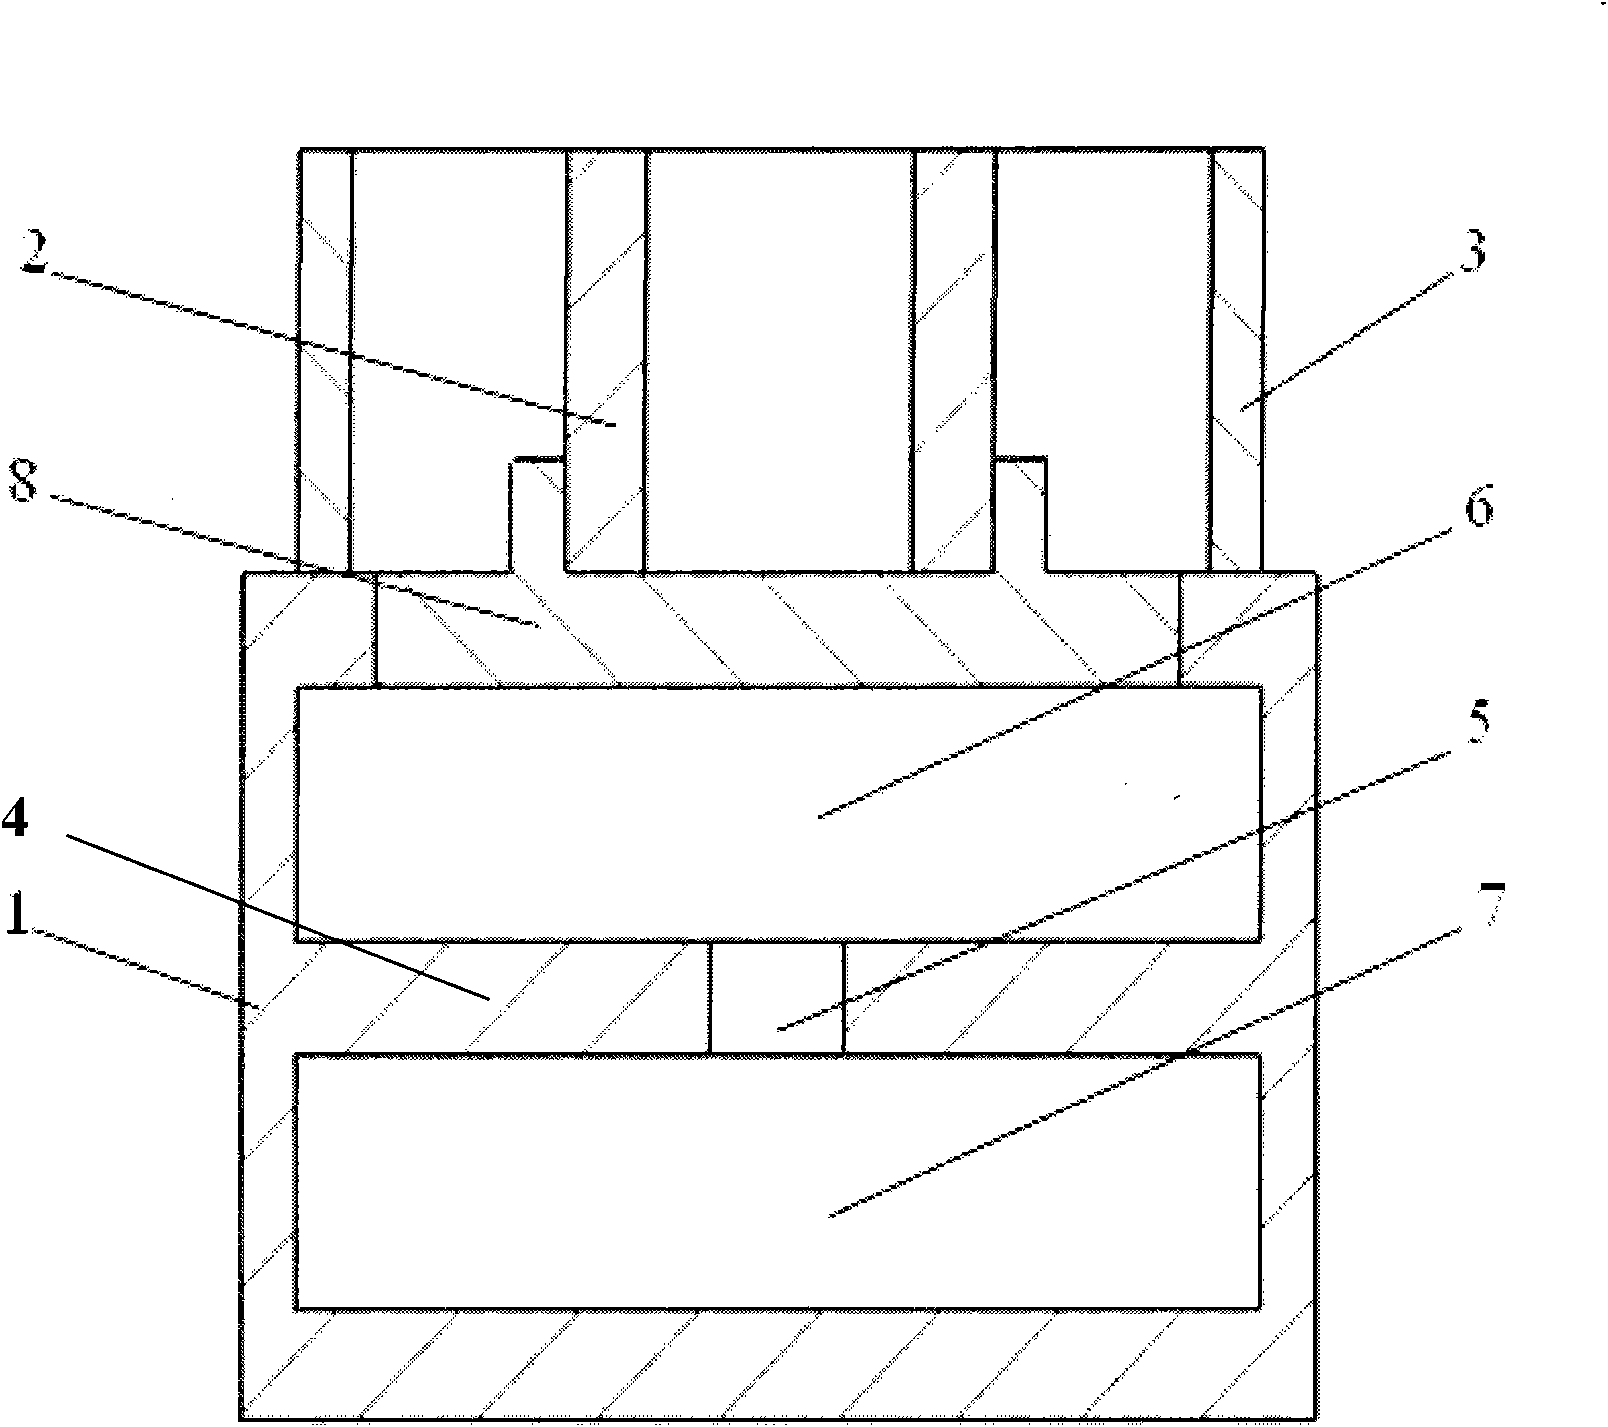 Low-frequency vibration isolator with three degrees of freedom